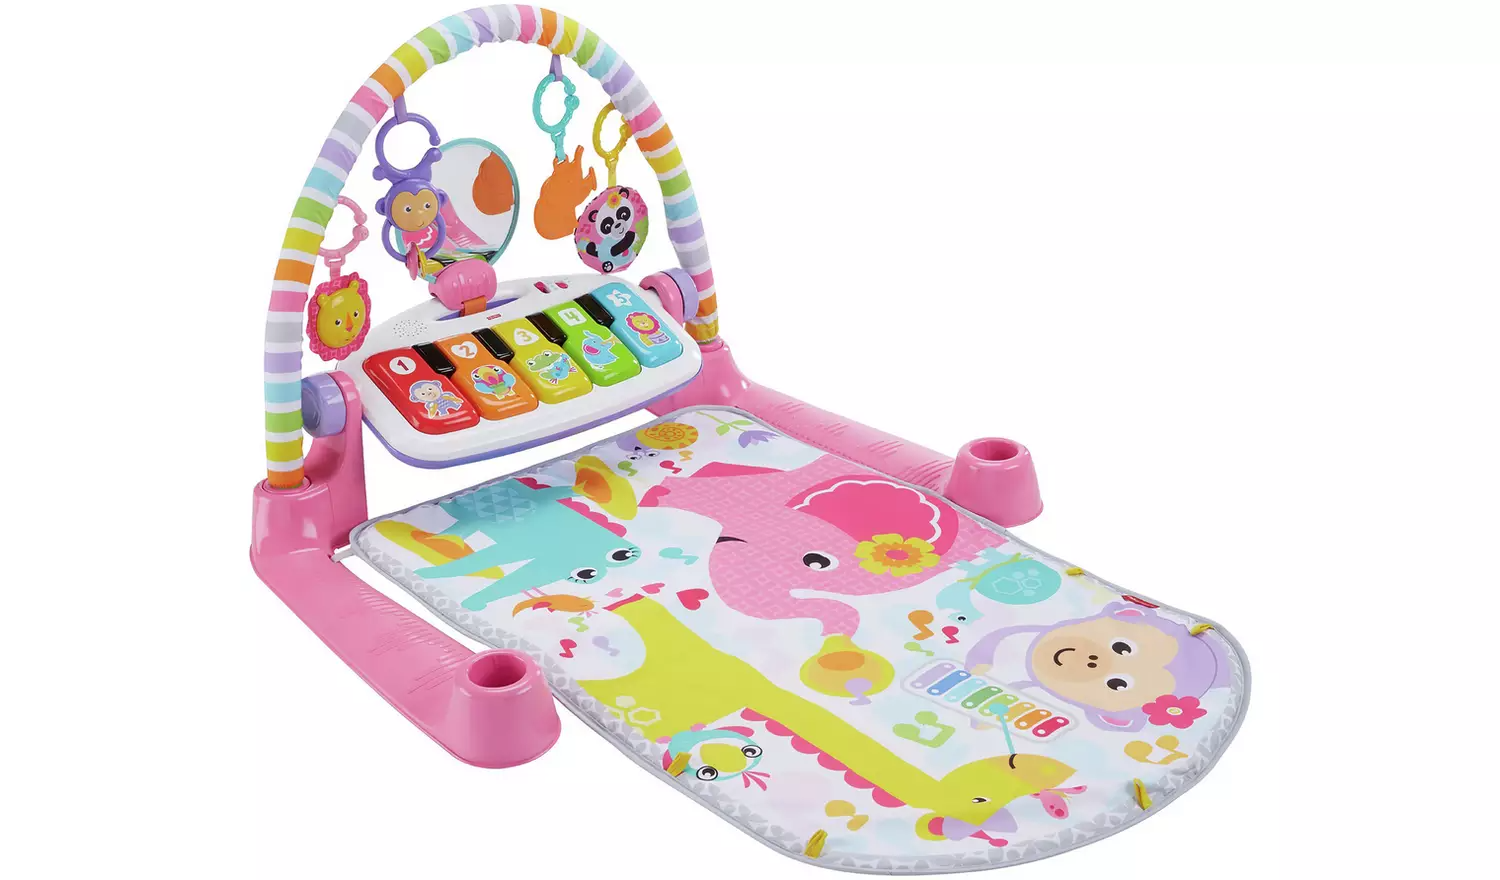 Fisher-Price Kick and Play Piano Gym – Pink